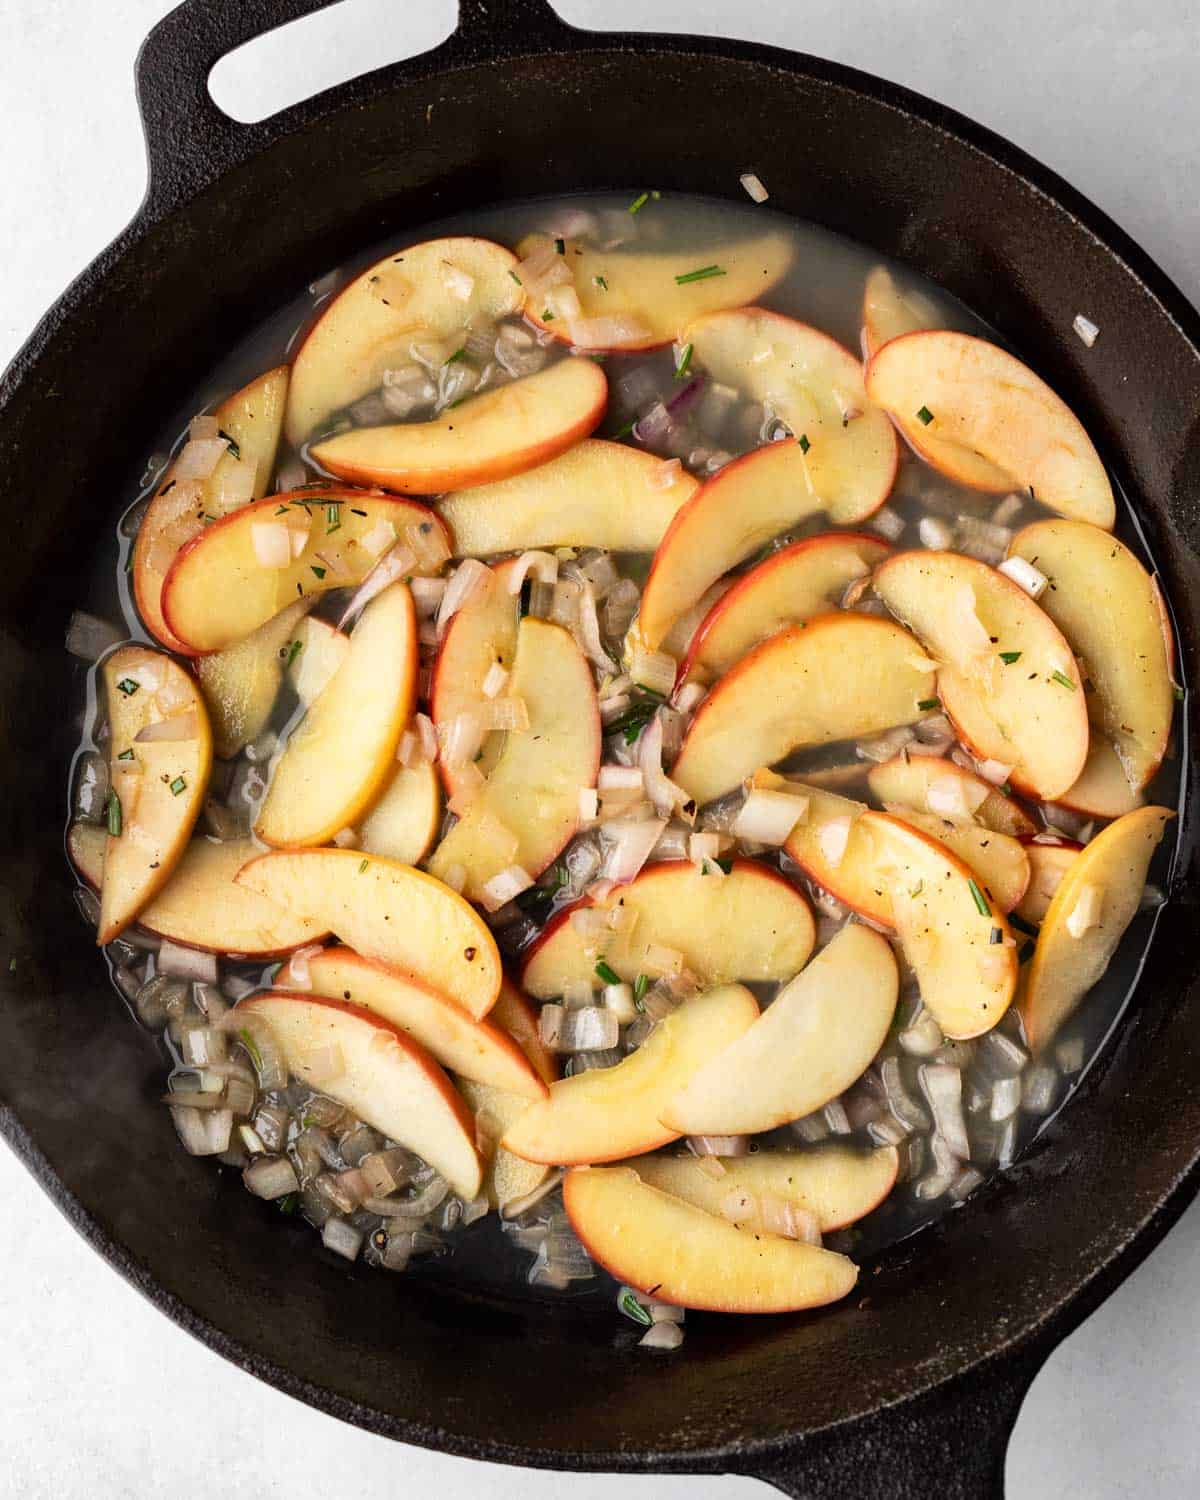 Deglazing the skillet with apple cider.